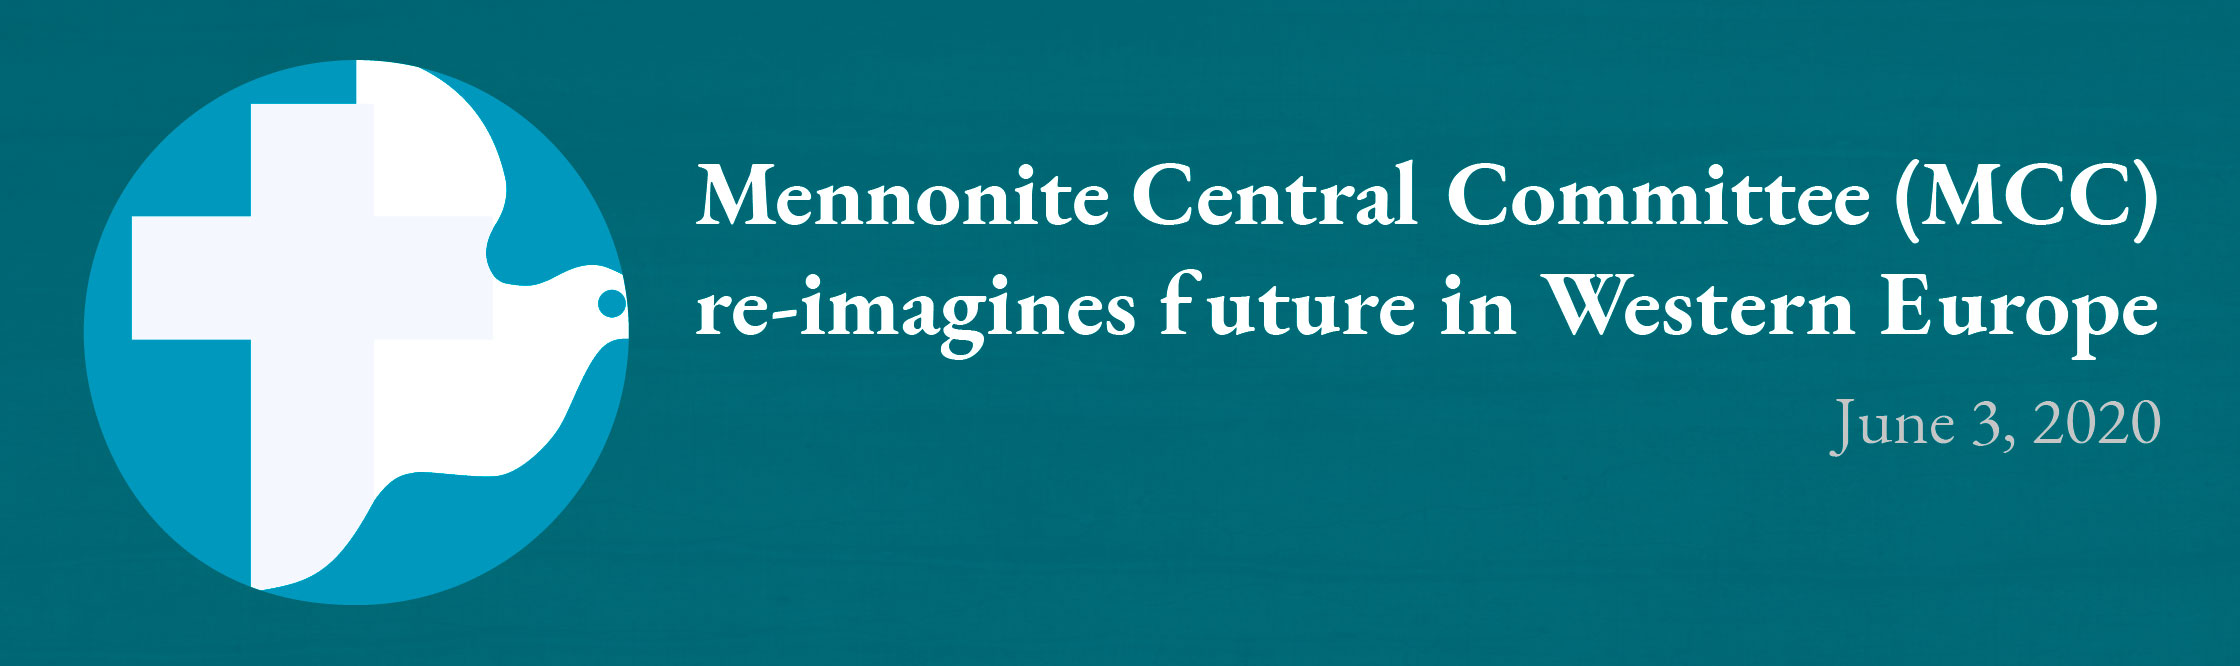 Mennonite Central Committee (MCC) re-imagines future in Western Europe